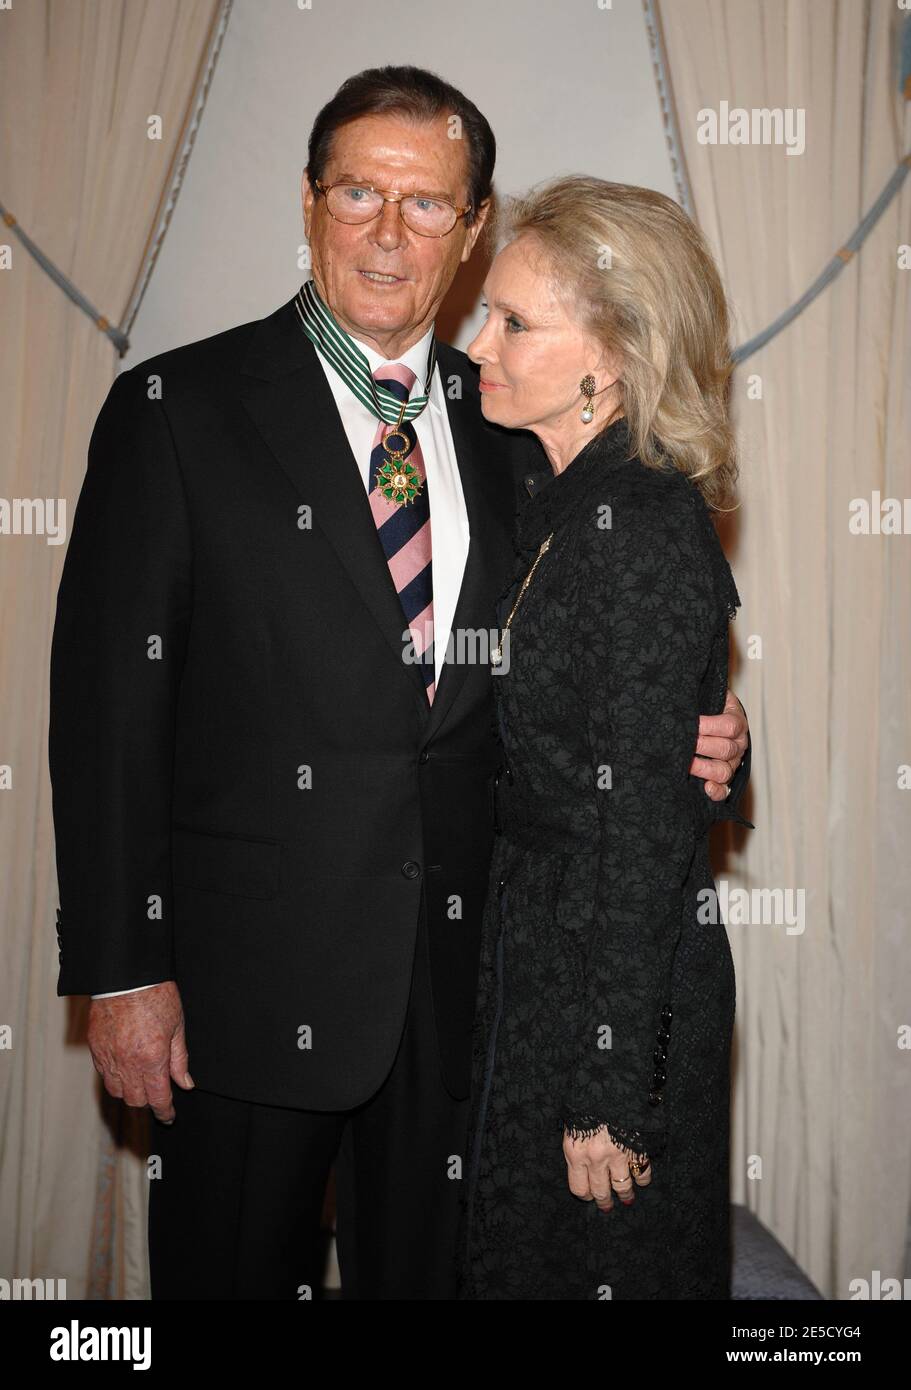 Sir Roger Moore, accompagned by his wife Kristina Tholstrup, receiving the Chevalier of Arts and Literature medal at the Ministry of Culture in Paris, France on October 28, 2008. Photo by Thierry Orban/ABACAPRESS.COM Stock Photo